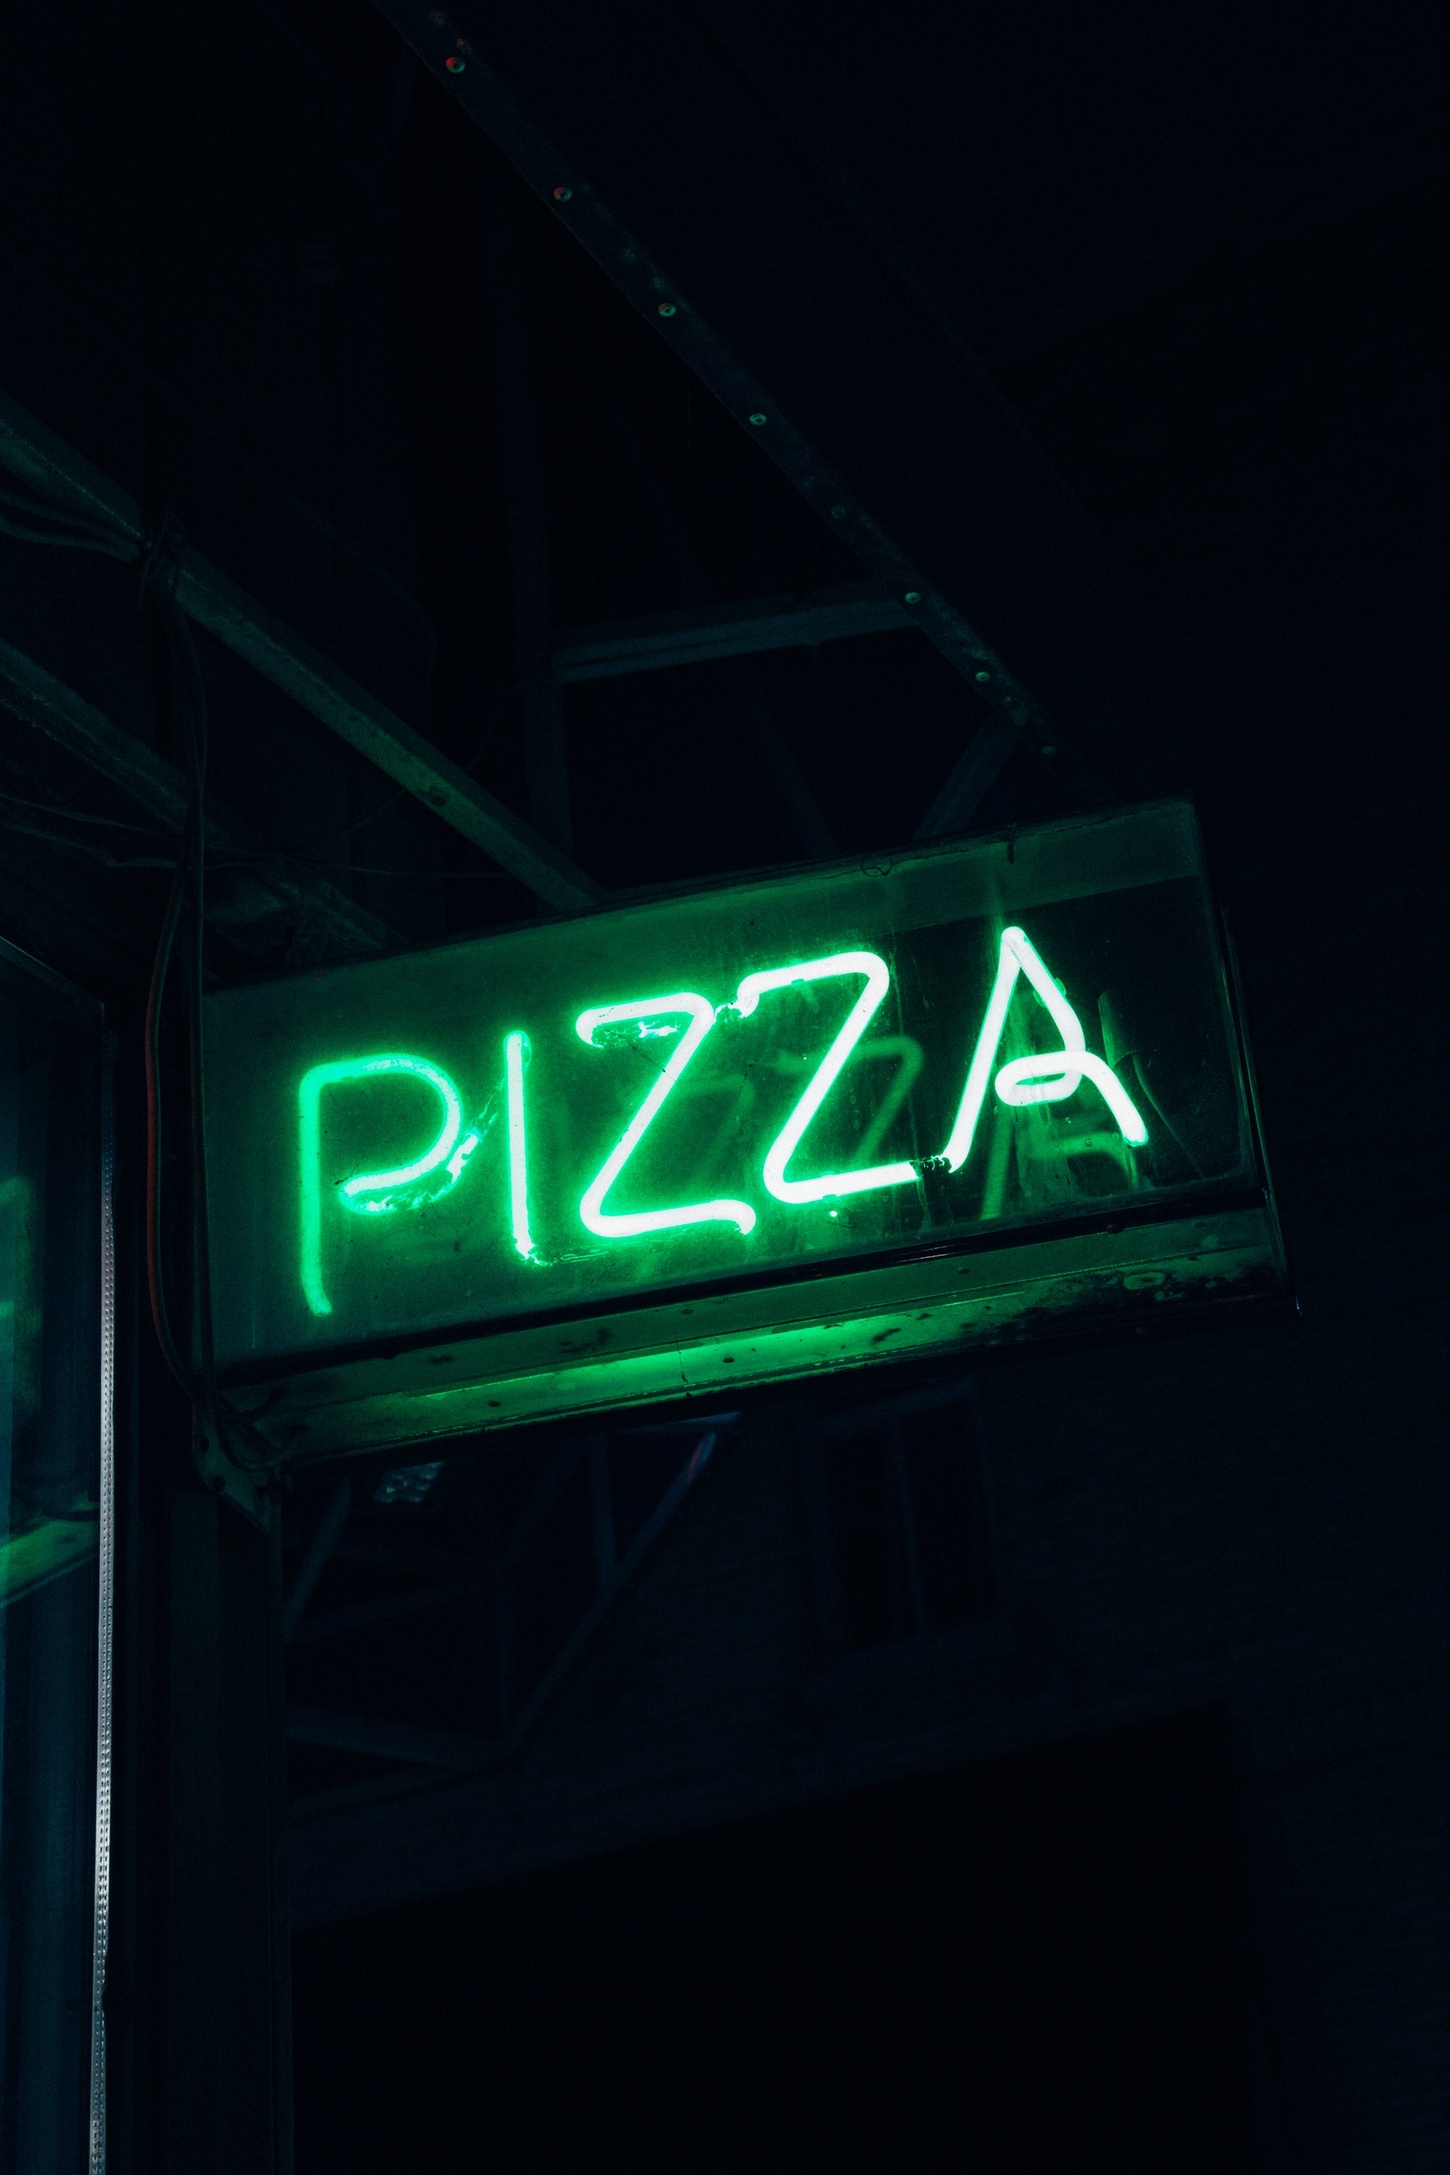 pizza sign